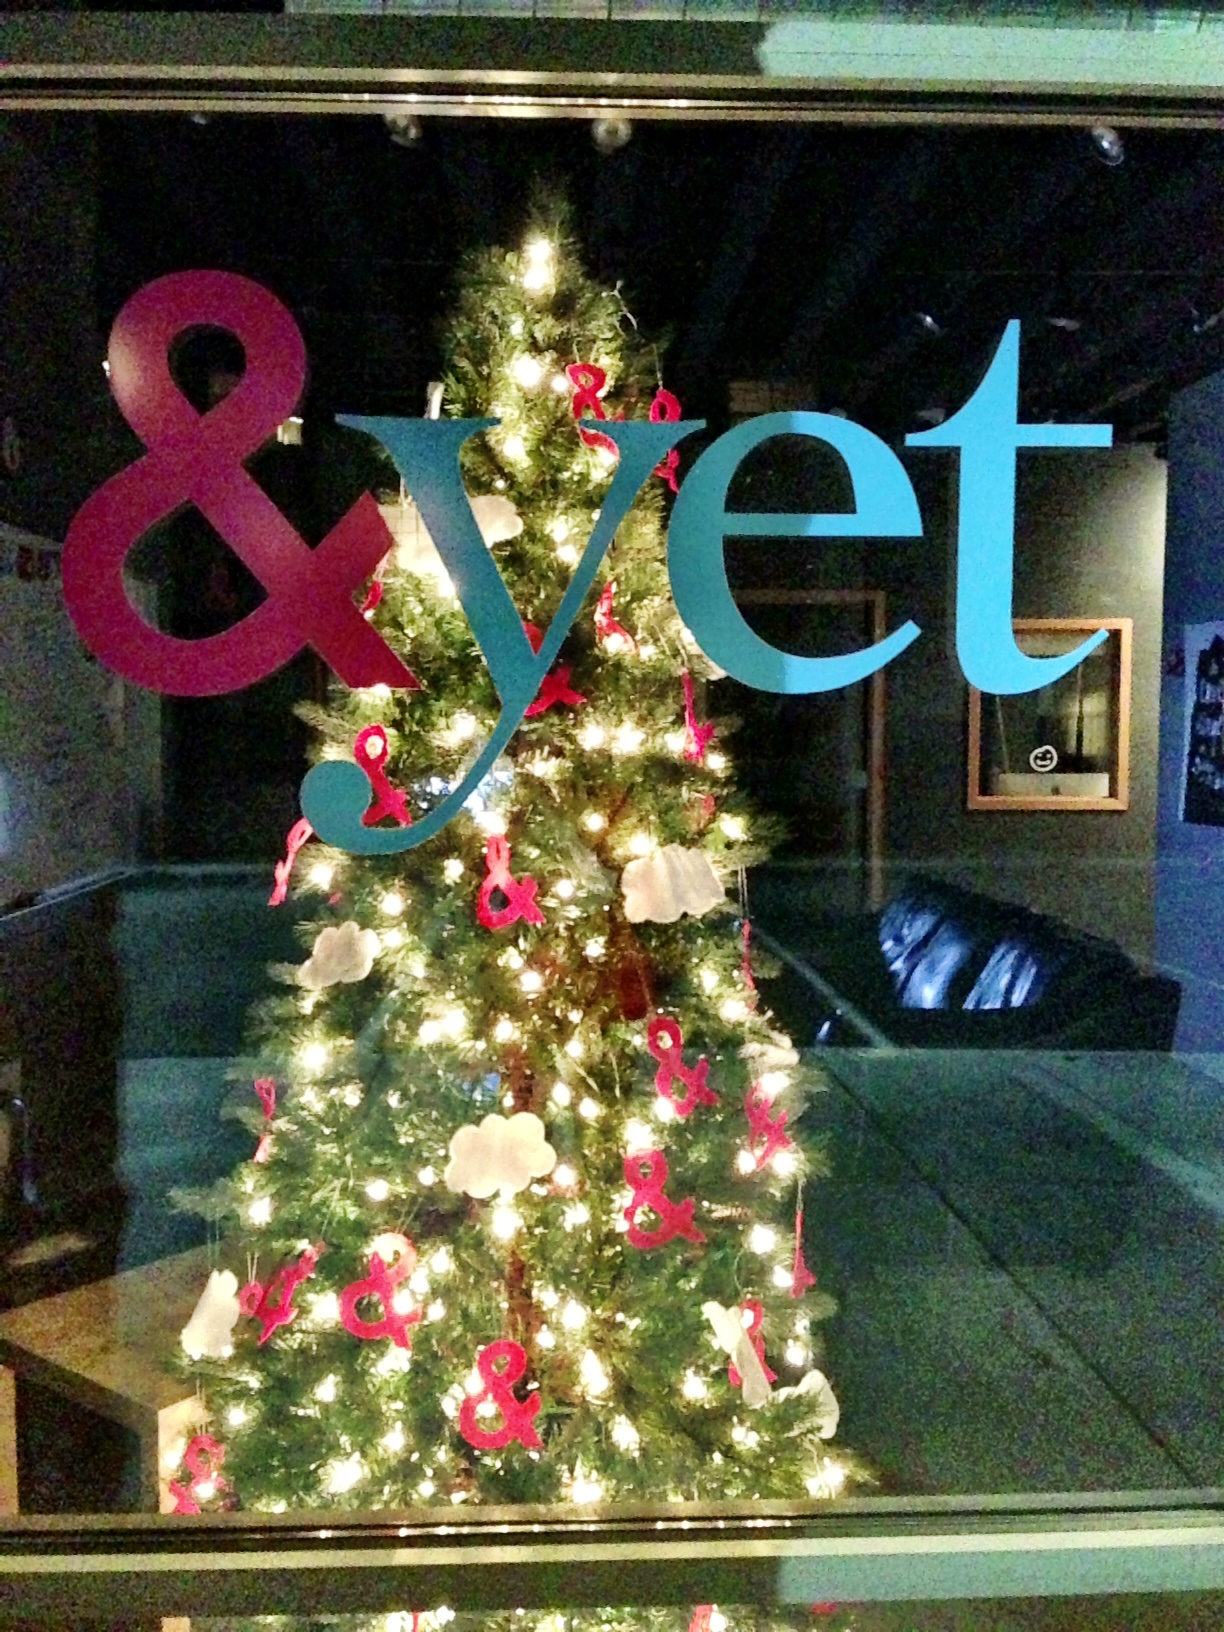 a christmas tree decorated with ampersands behind the &yet logo